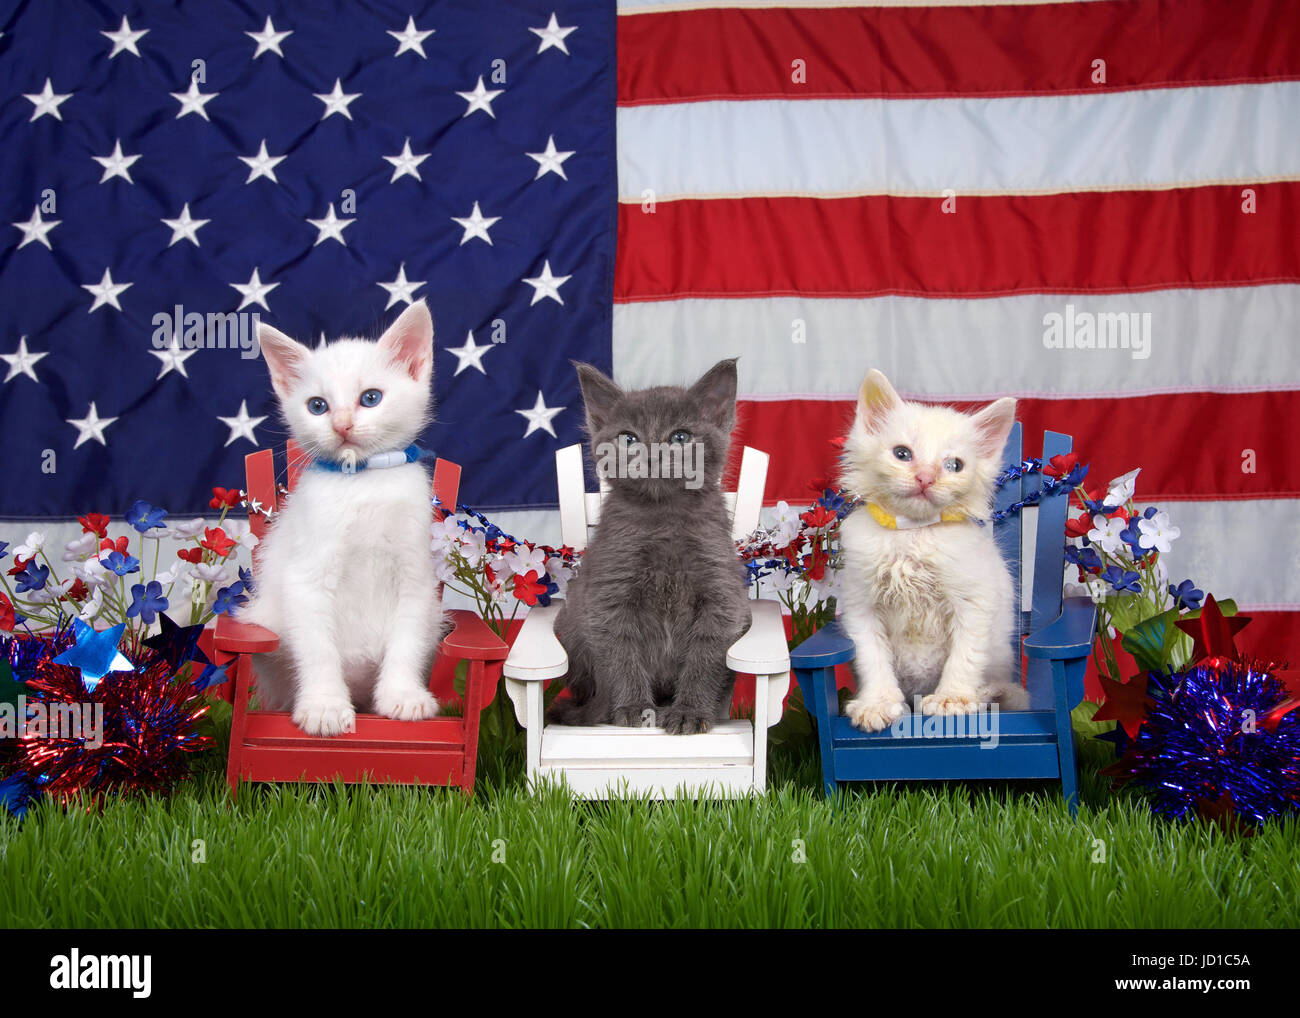 Two fluffy white kittens and one gray sitting in red white and blue chairs on green grass with american flag in the background. holiday family fun, re Stock Photo